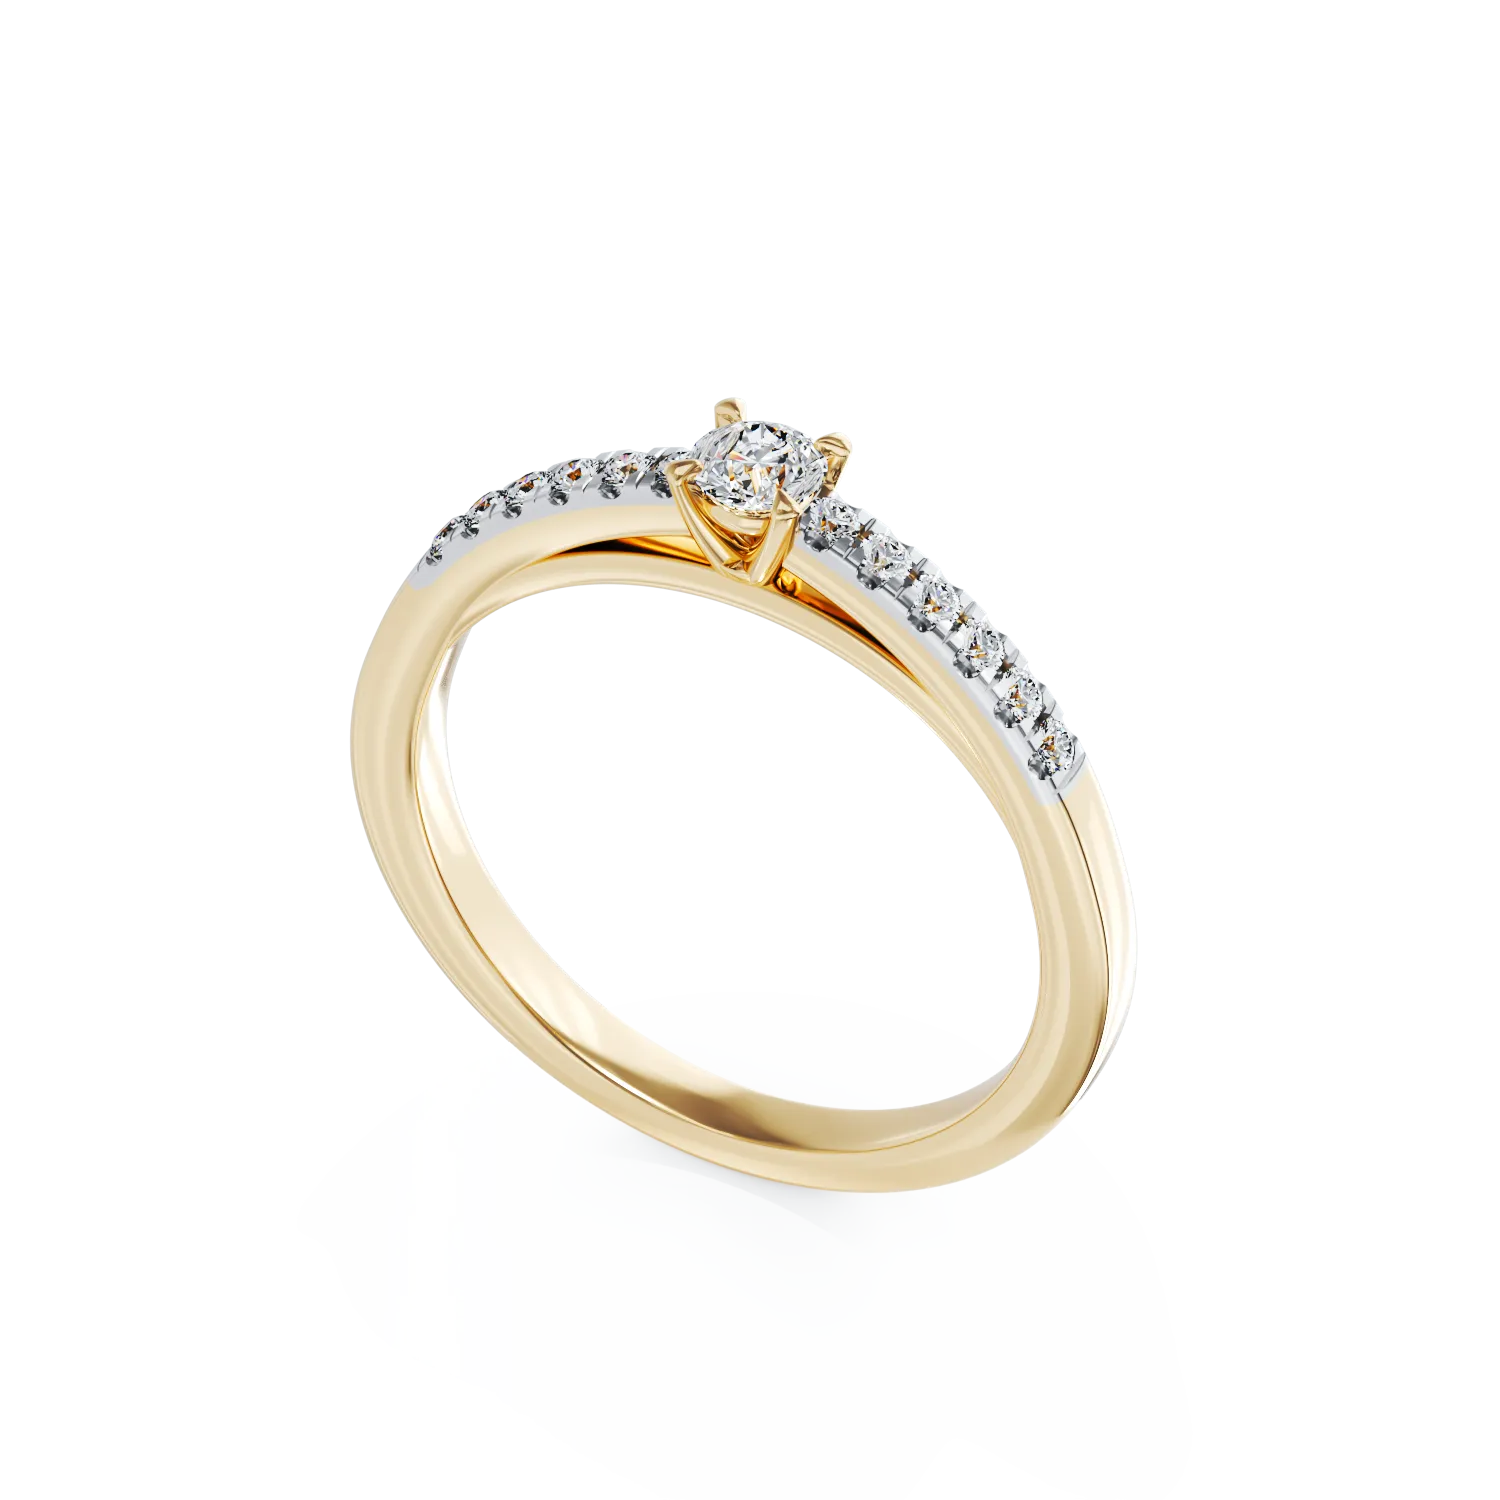 18K yellow gold engagement ring with 0.24ct diamond and 0.135ct diamonds